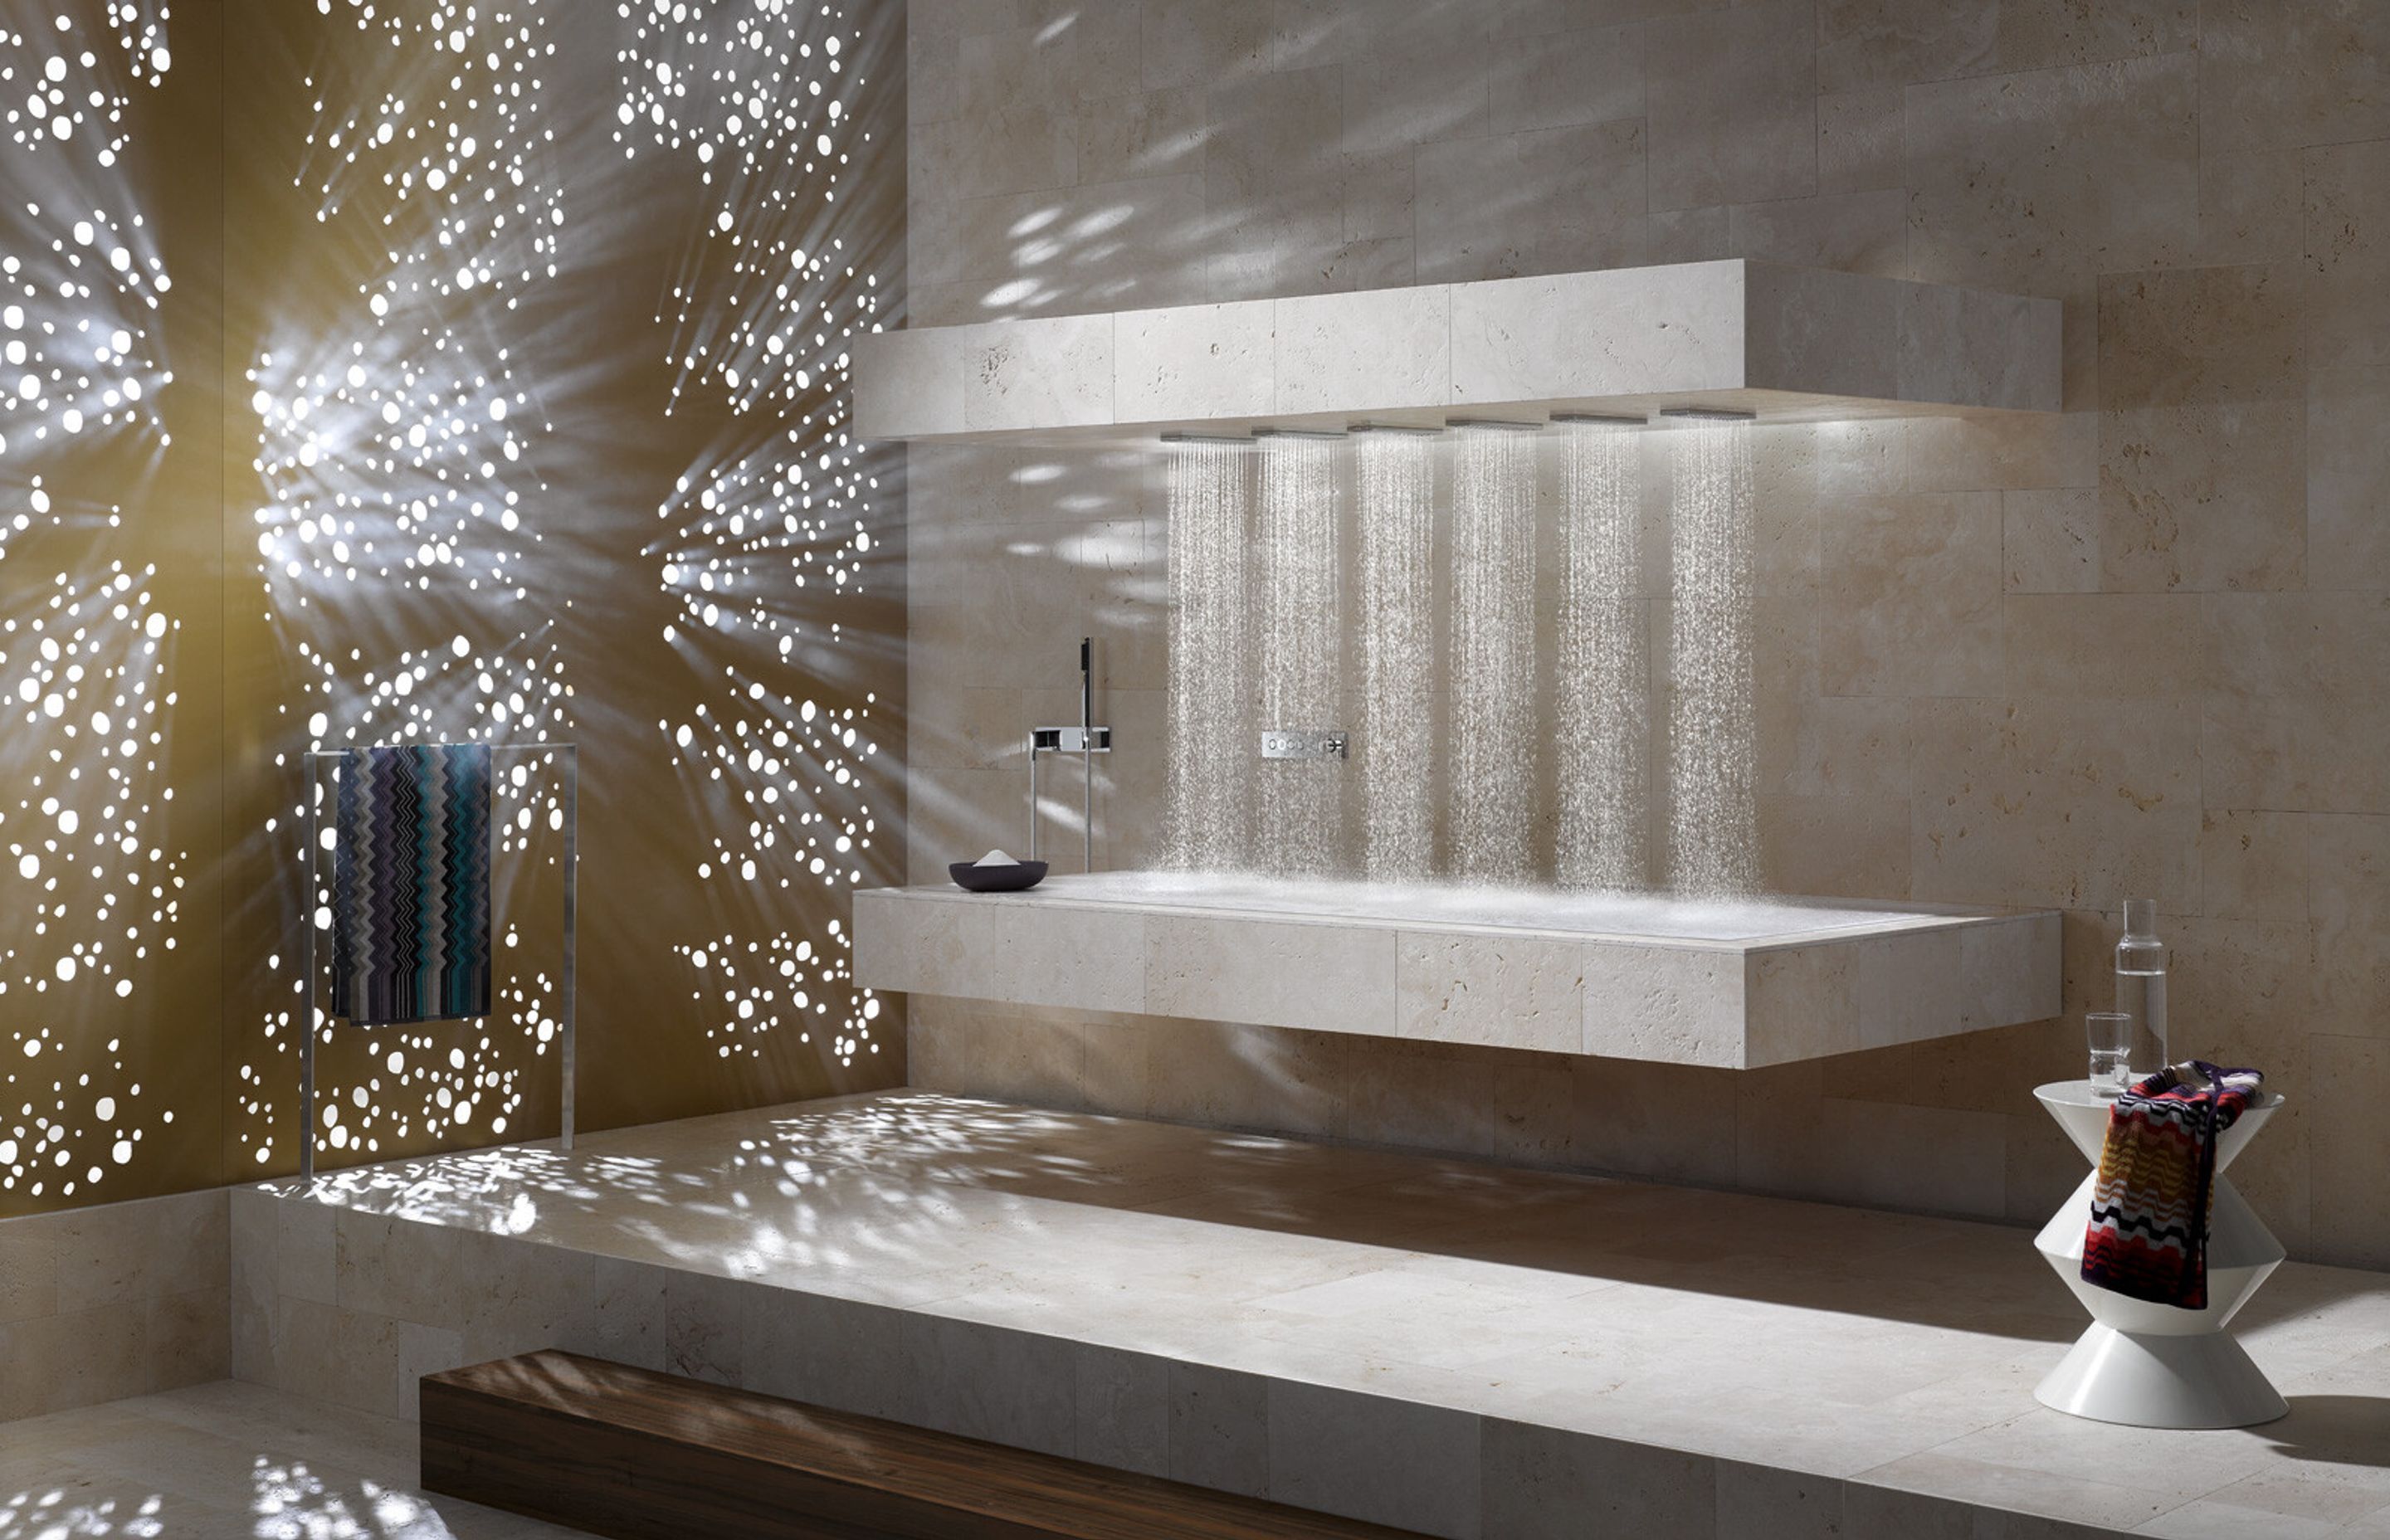 The Dornbracht horizontal shower enables maximum relaxation while lying down.